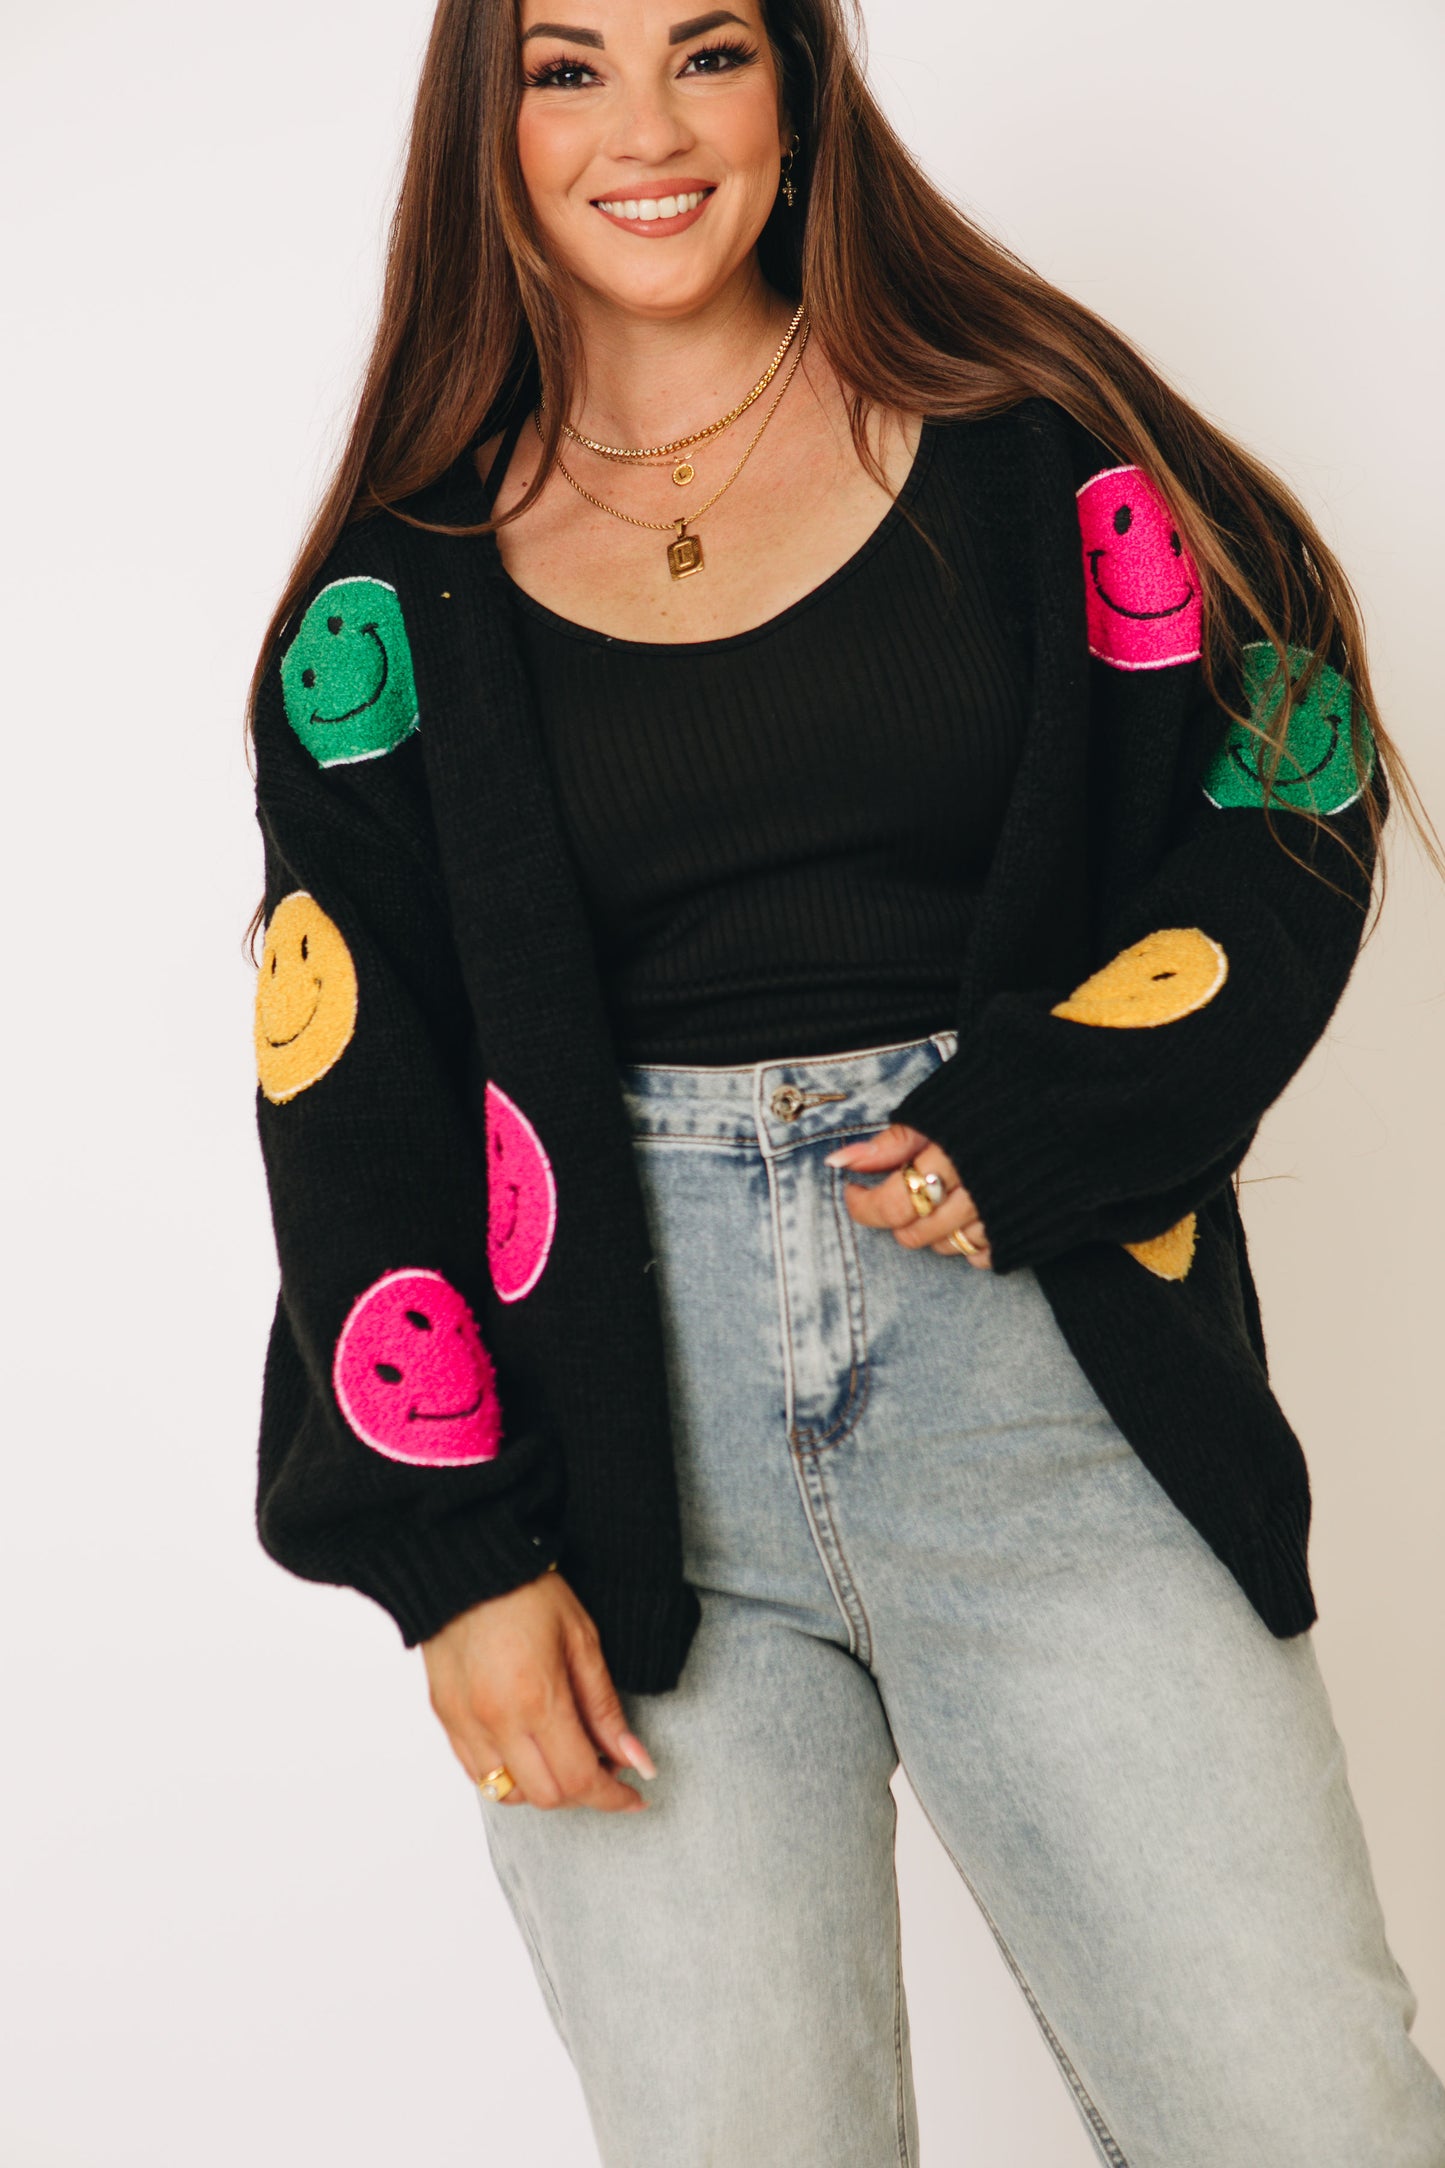 RESTOCKED 8/30 - Smiley Patches Open Front Sweater Cardigan (S-XL)